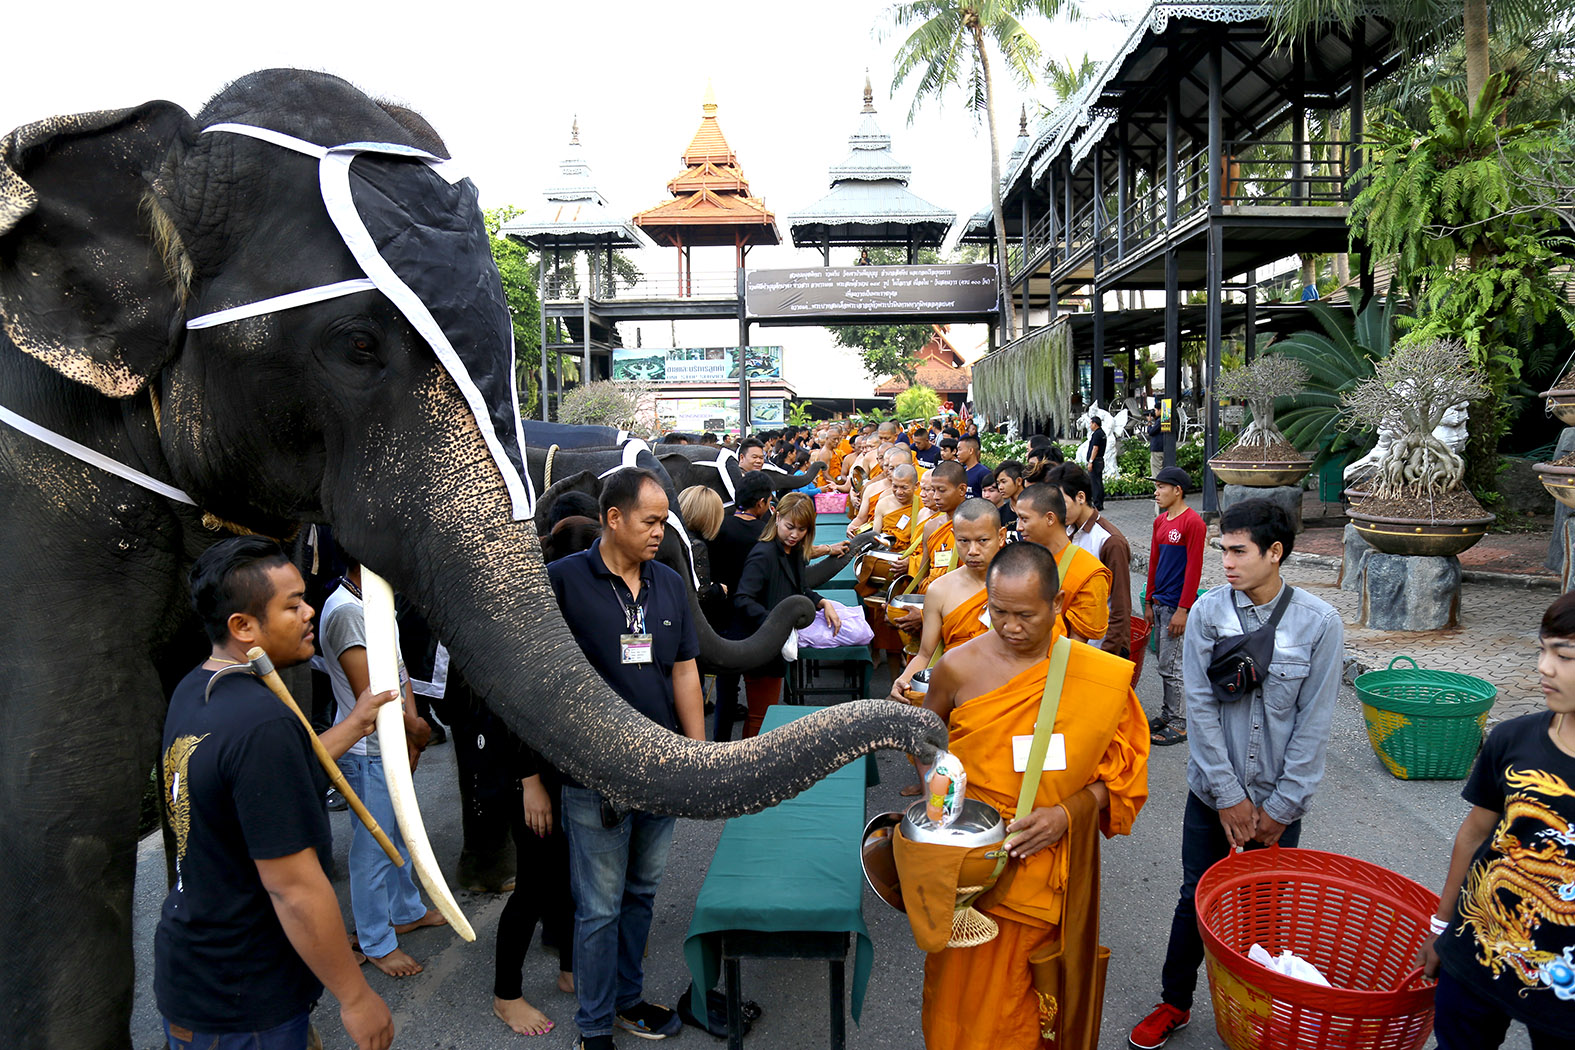 Nine elephants offered alms as Nong Nooch Tropical Garden observed the 100-day anniversary of HM King Bhumibol’s death.